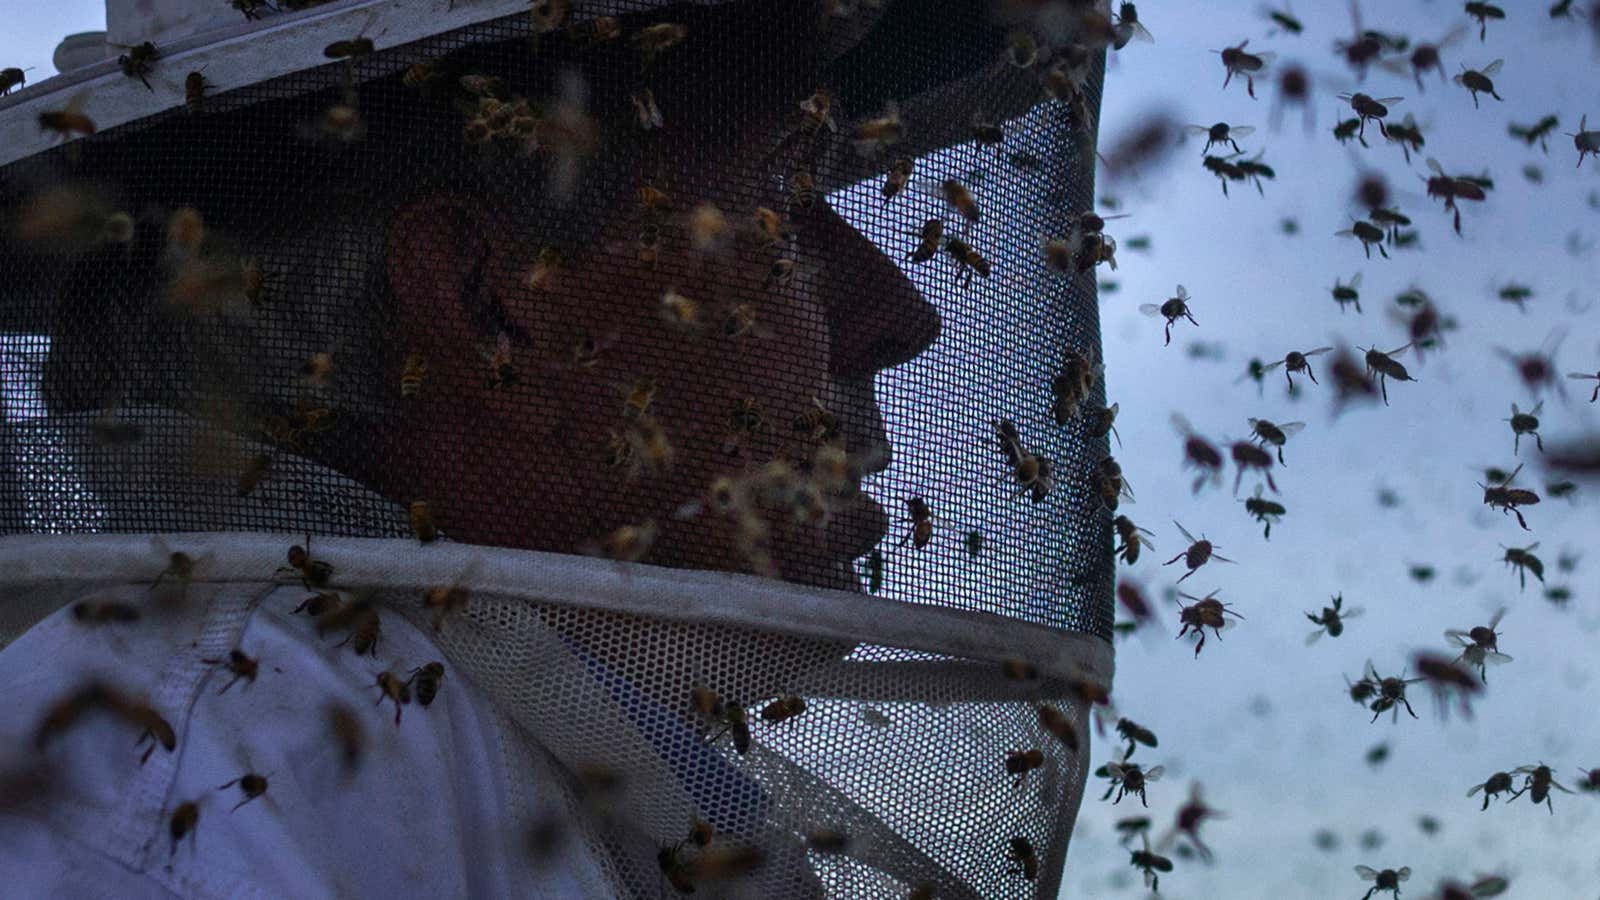 North American honey bees are under a new threat.